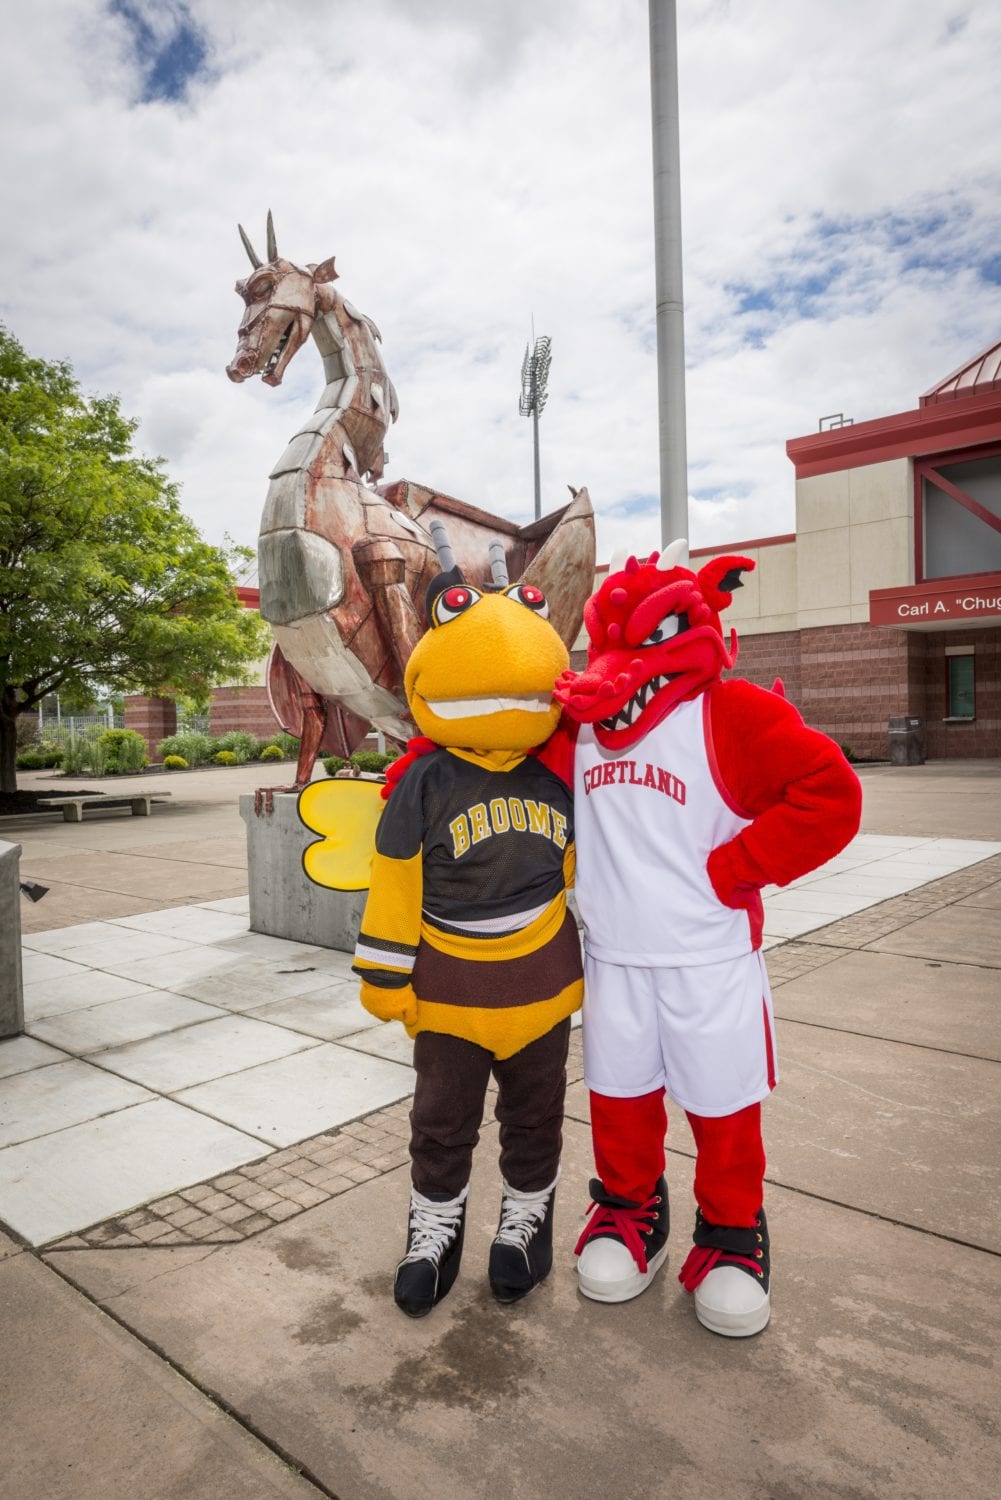 Interested in SUNY Cortland? It’s time to check in with Greg!